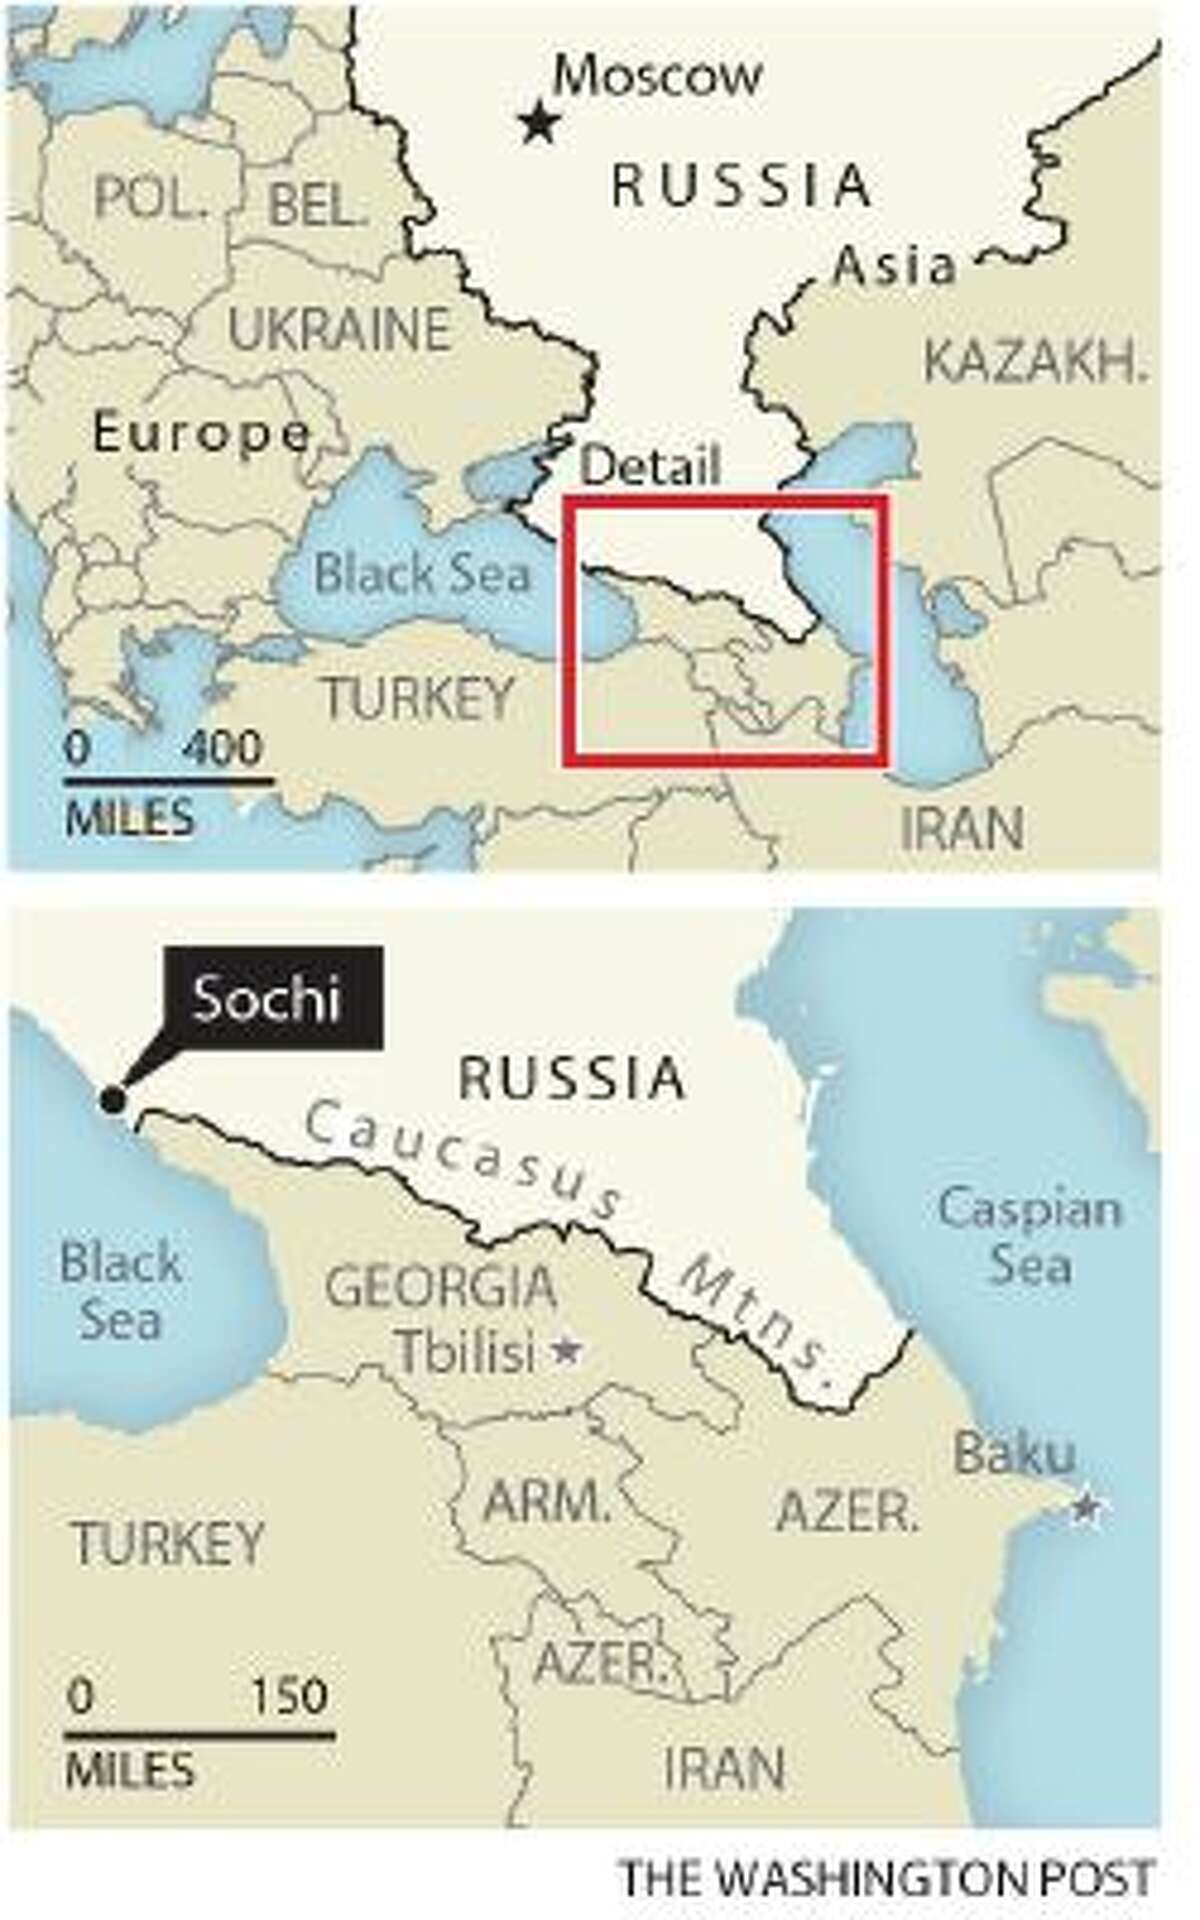 Sochi, Russia, is undergoing a major facelift as the subtropical Black Sea city prepares for the Winter Olympics in February.